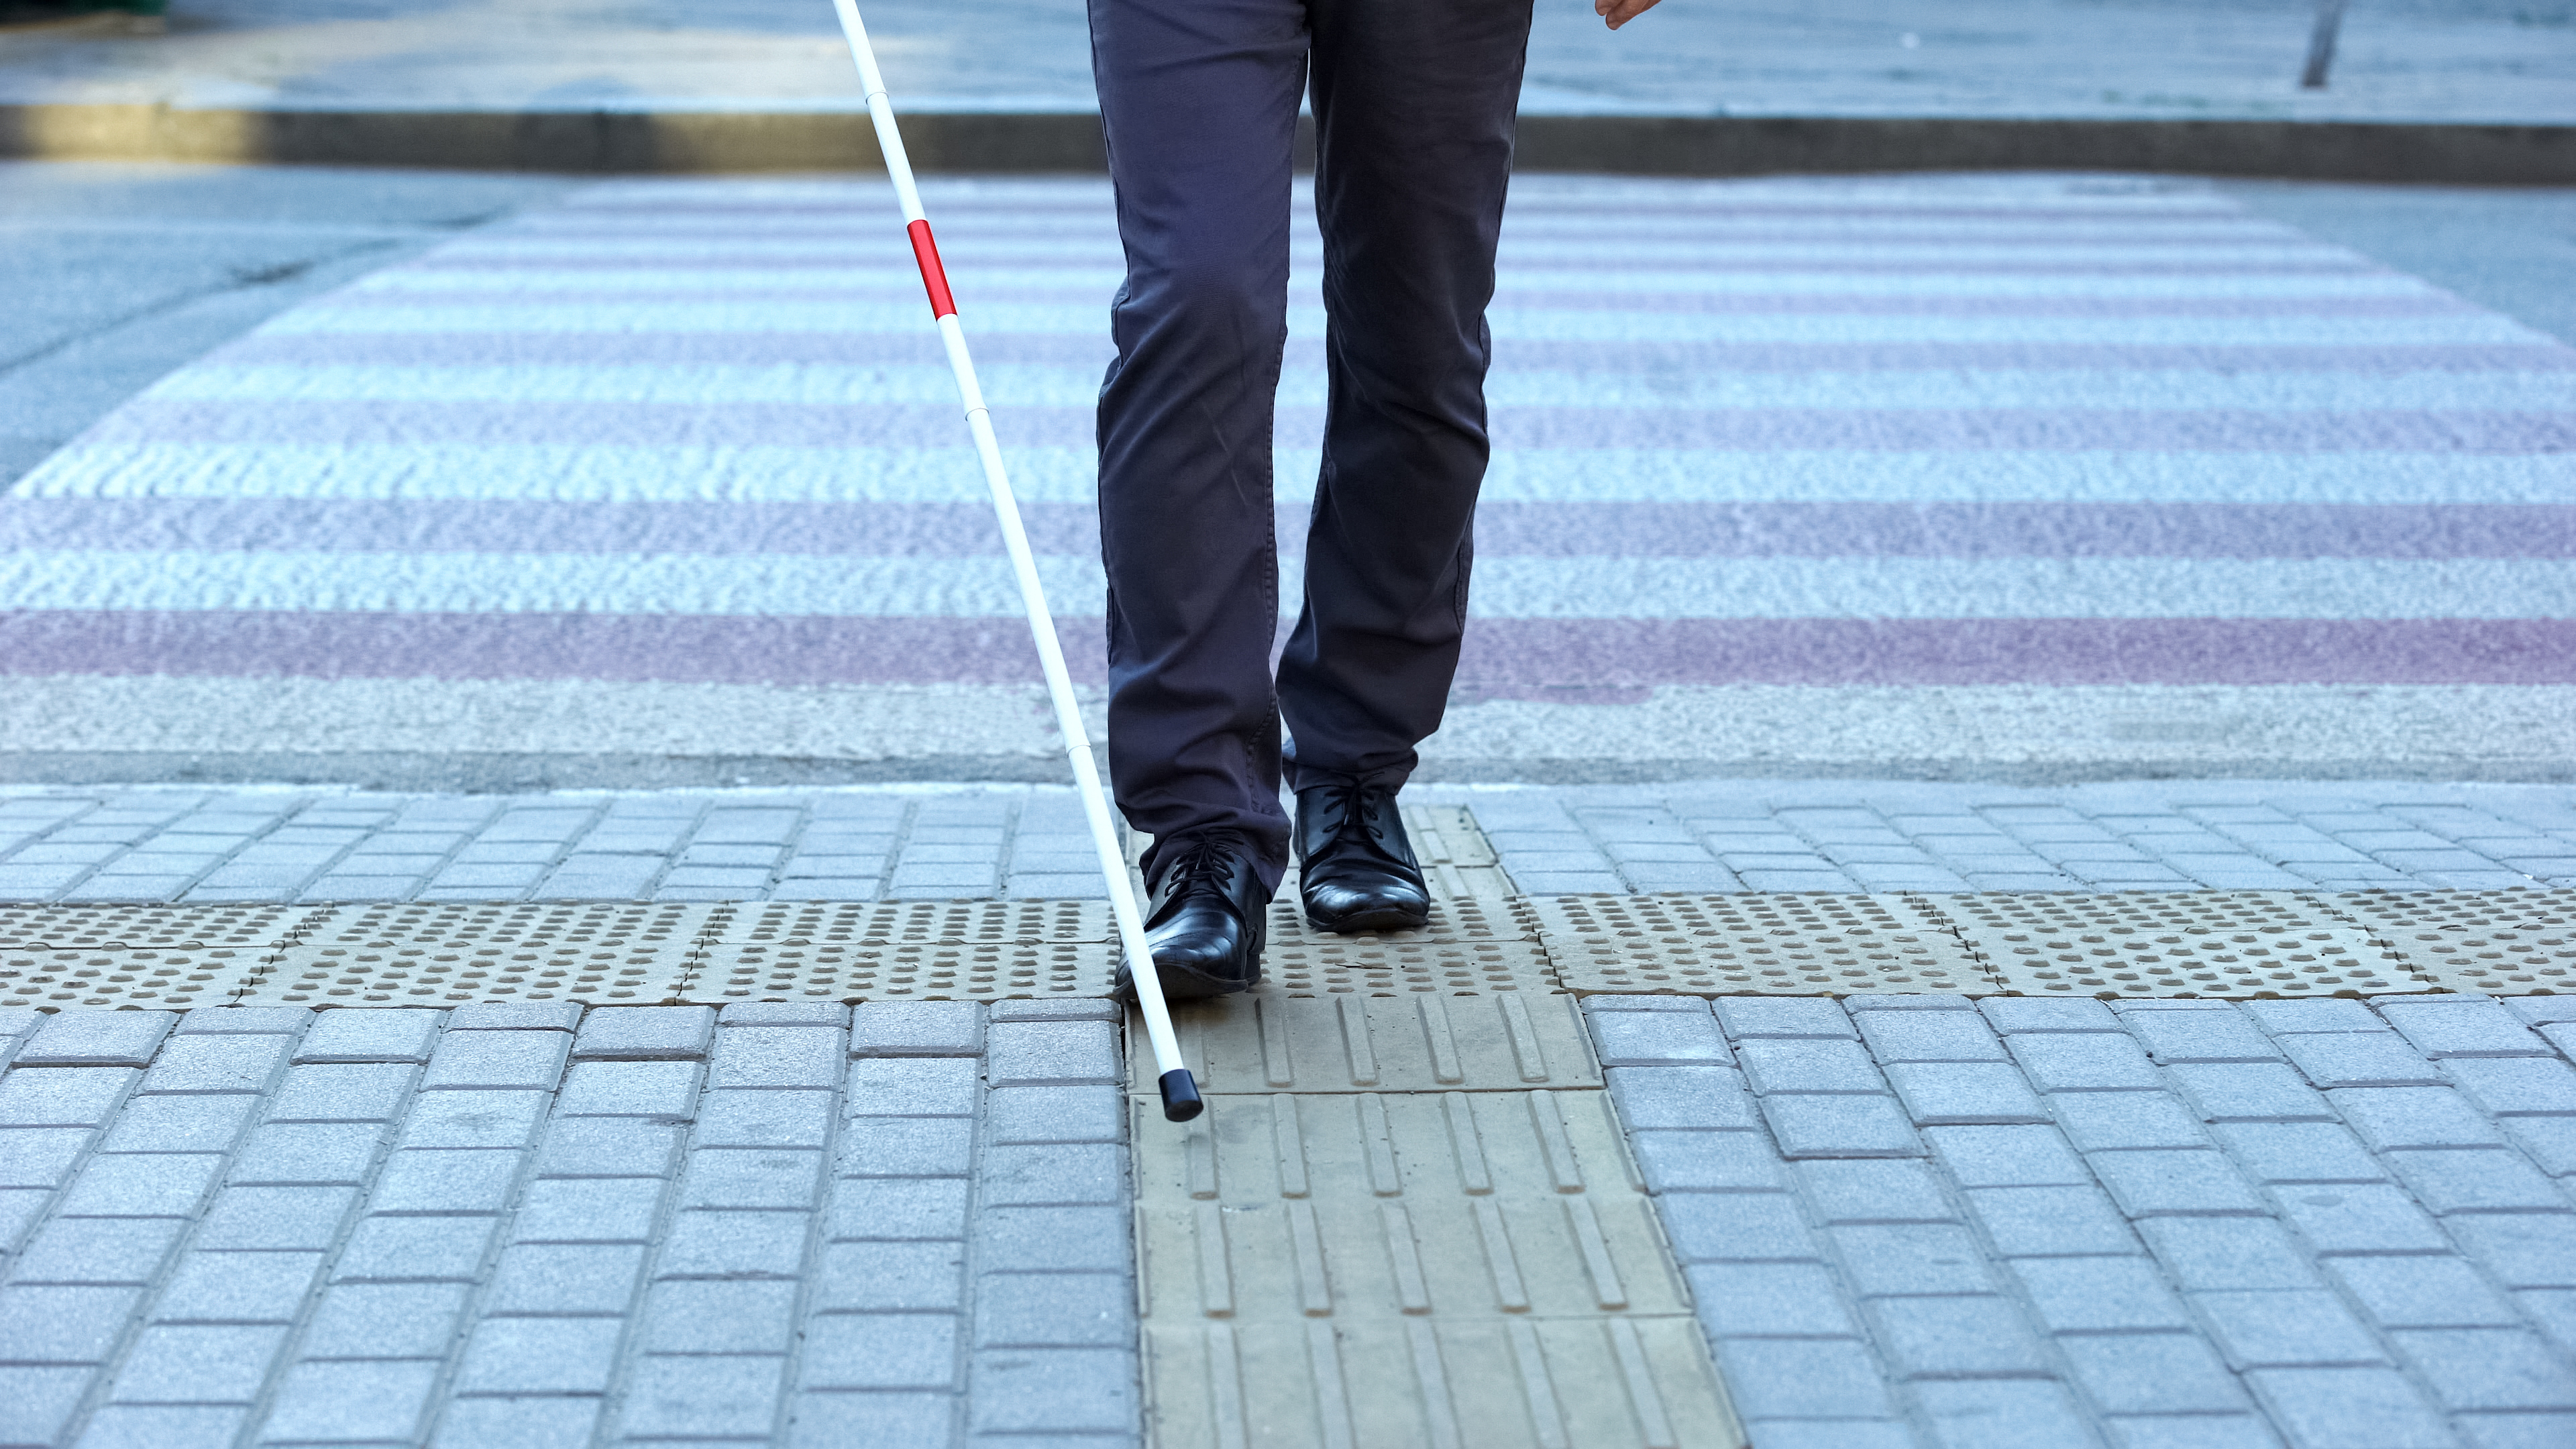 visually impaired person crossing the road.